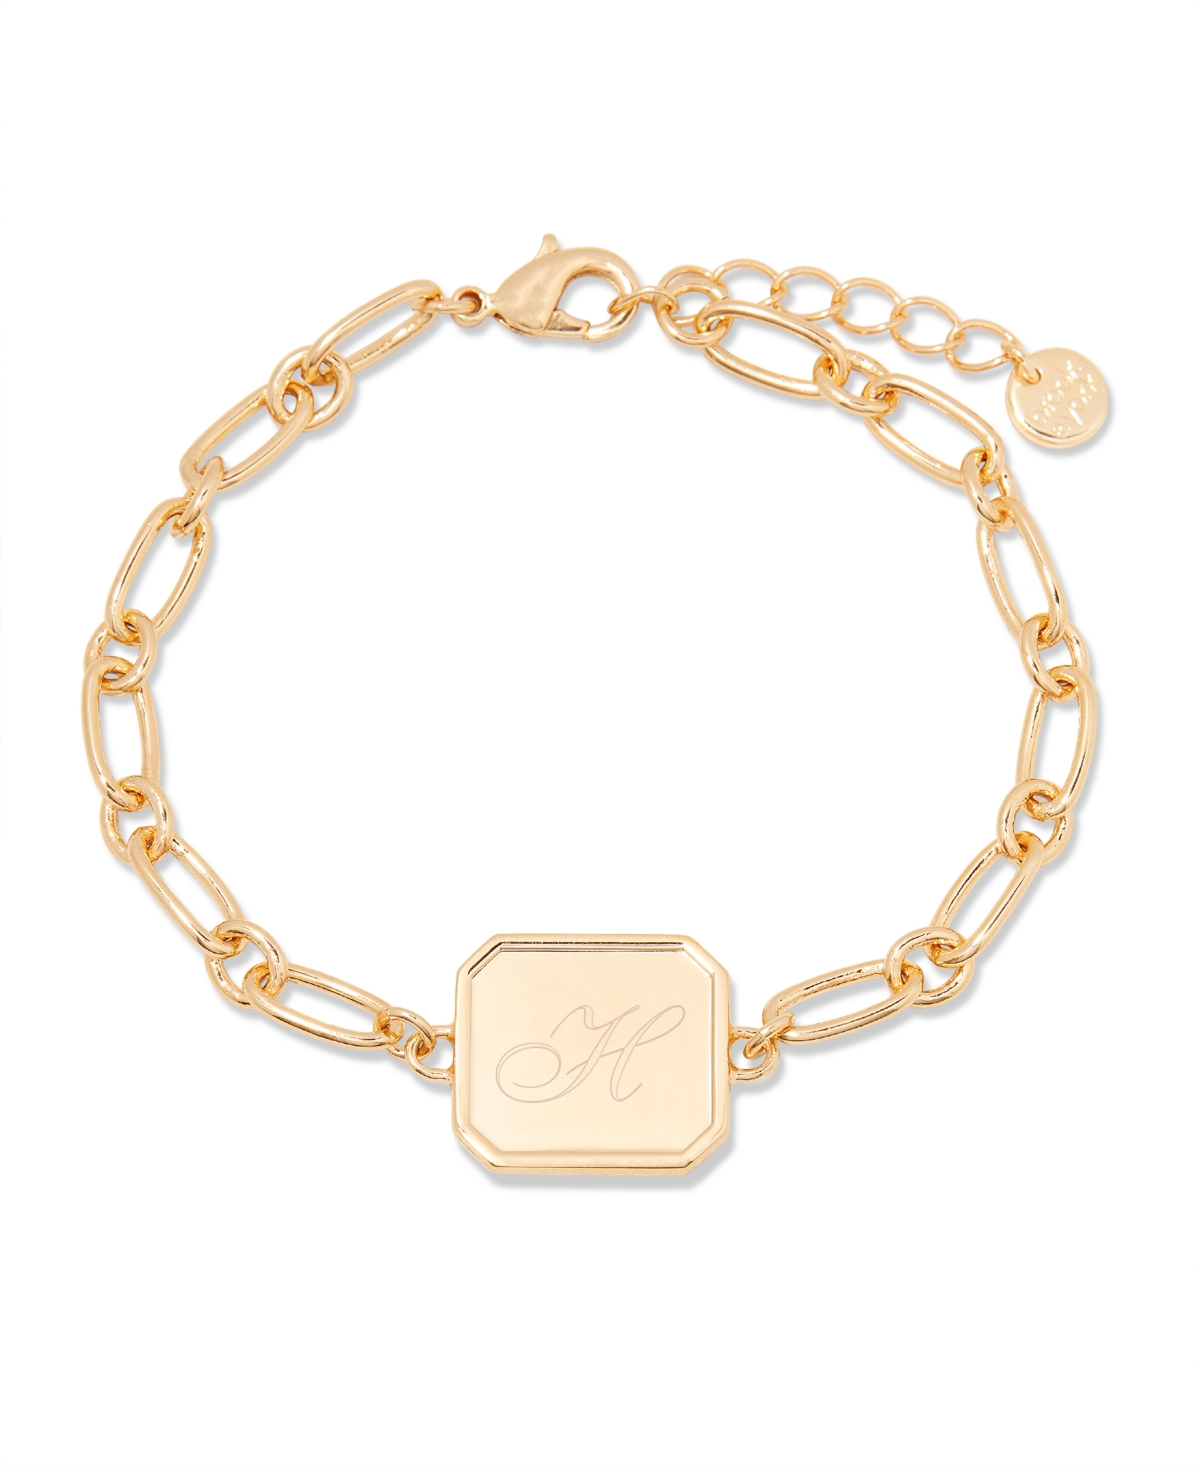 BROOK & YORK 14K GOLD-PLATED QUINCY PERSONALIZED INITIAL BRACELET